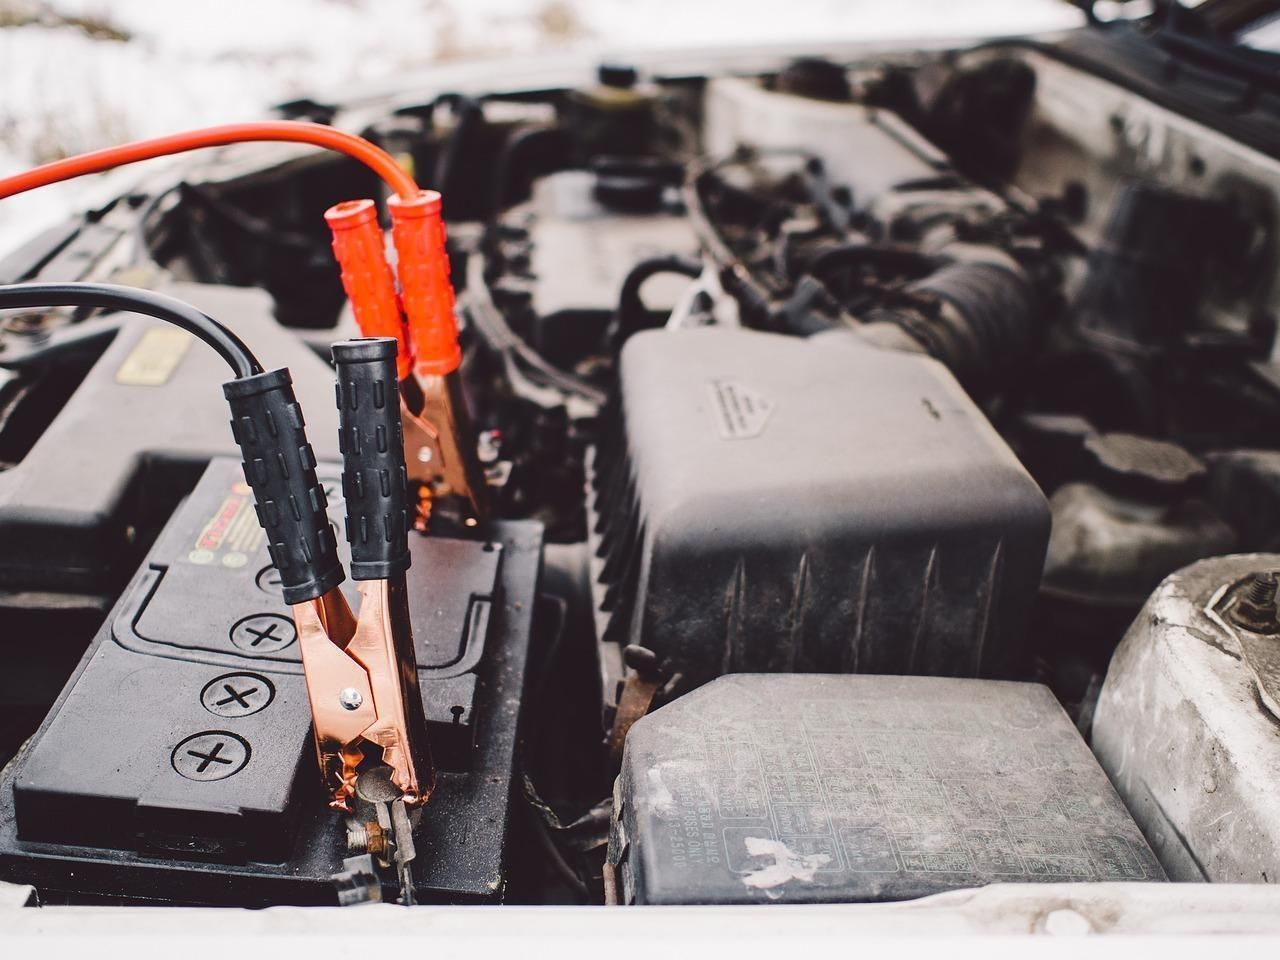 Battery Service at ﻿Northuis Auto Repair﻿ in ﻿Jenison, MI﻿